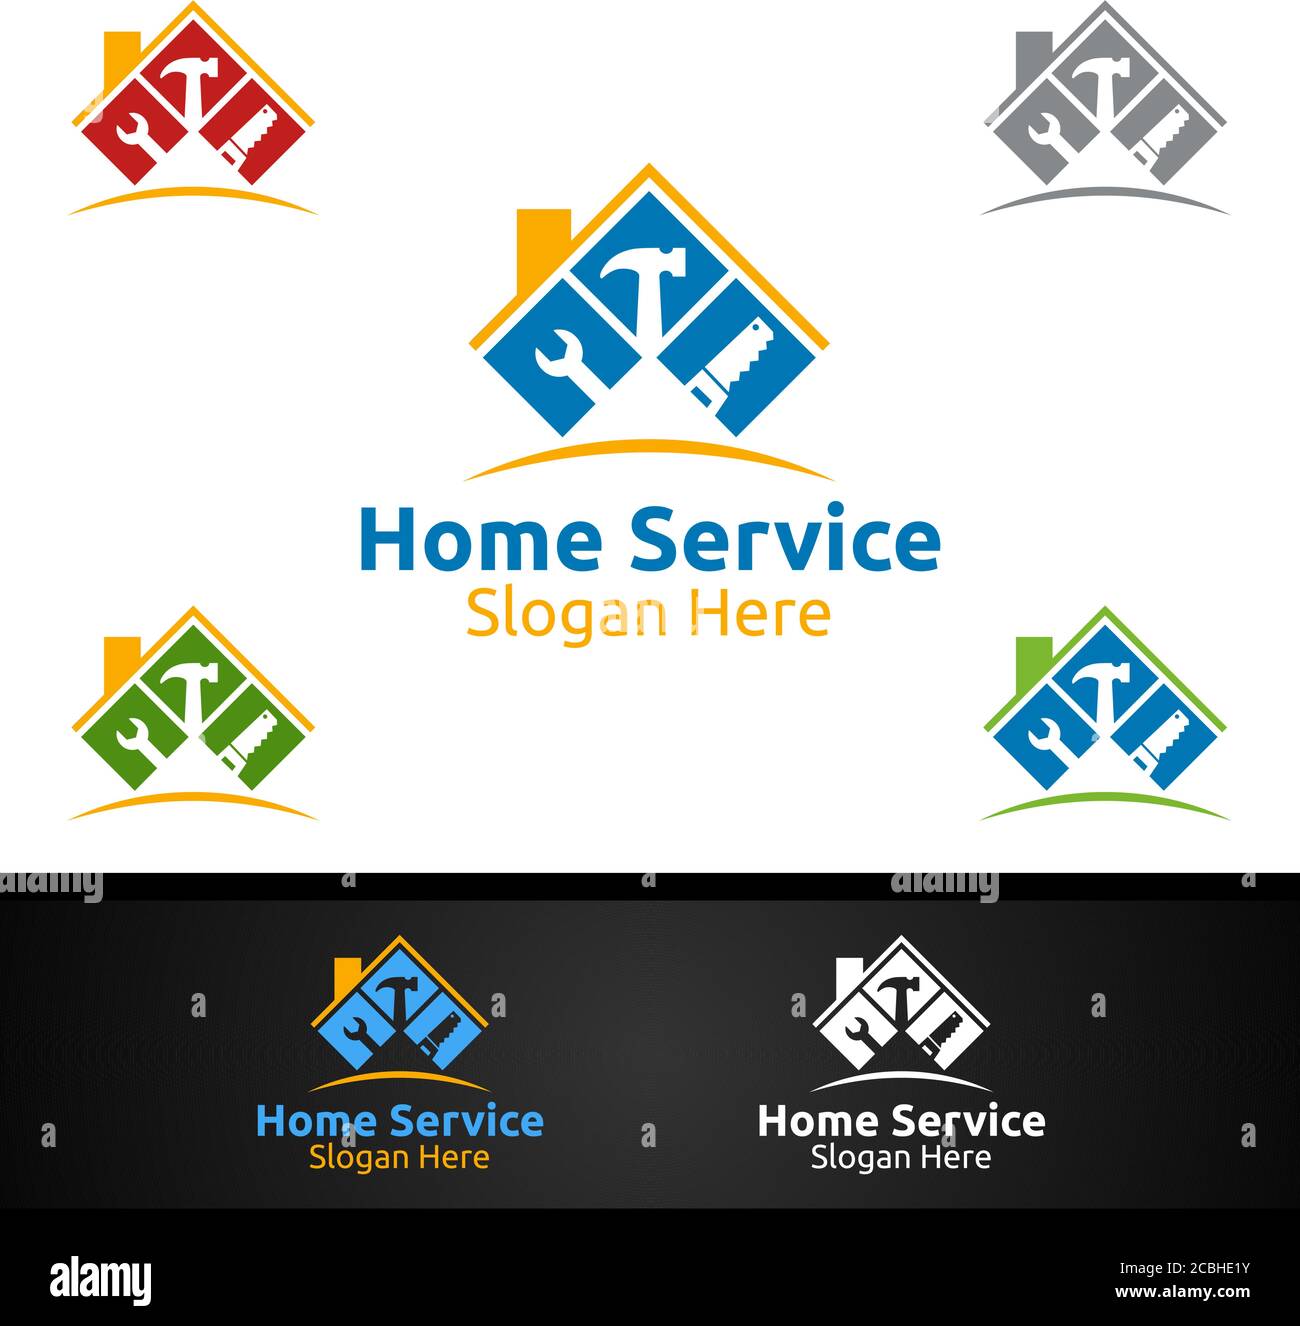 Real Estate and Fix Home Repair Services Logo Design Stock Vector